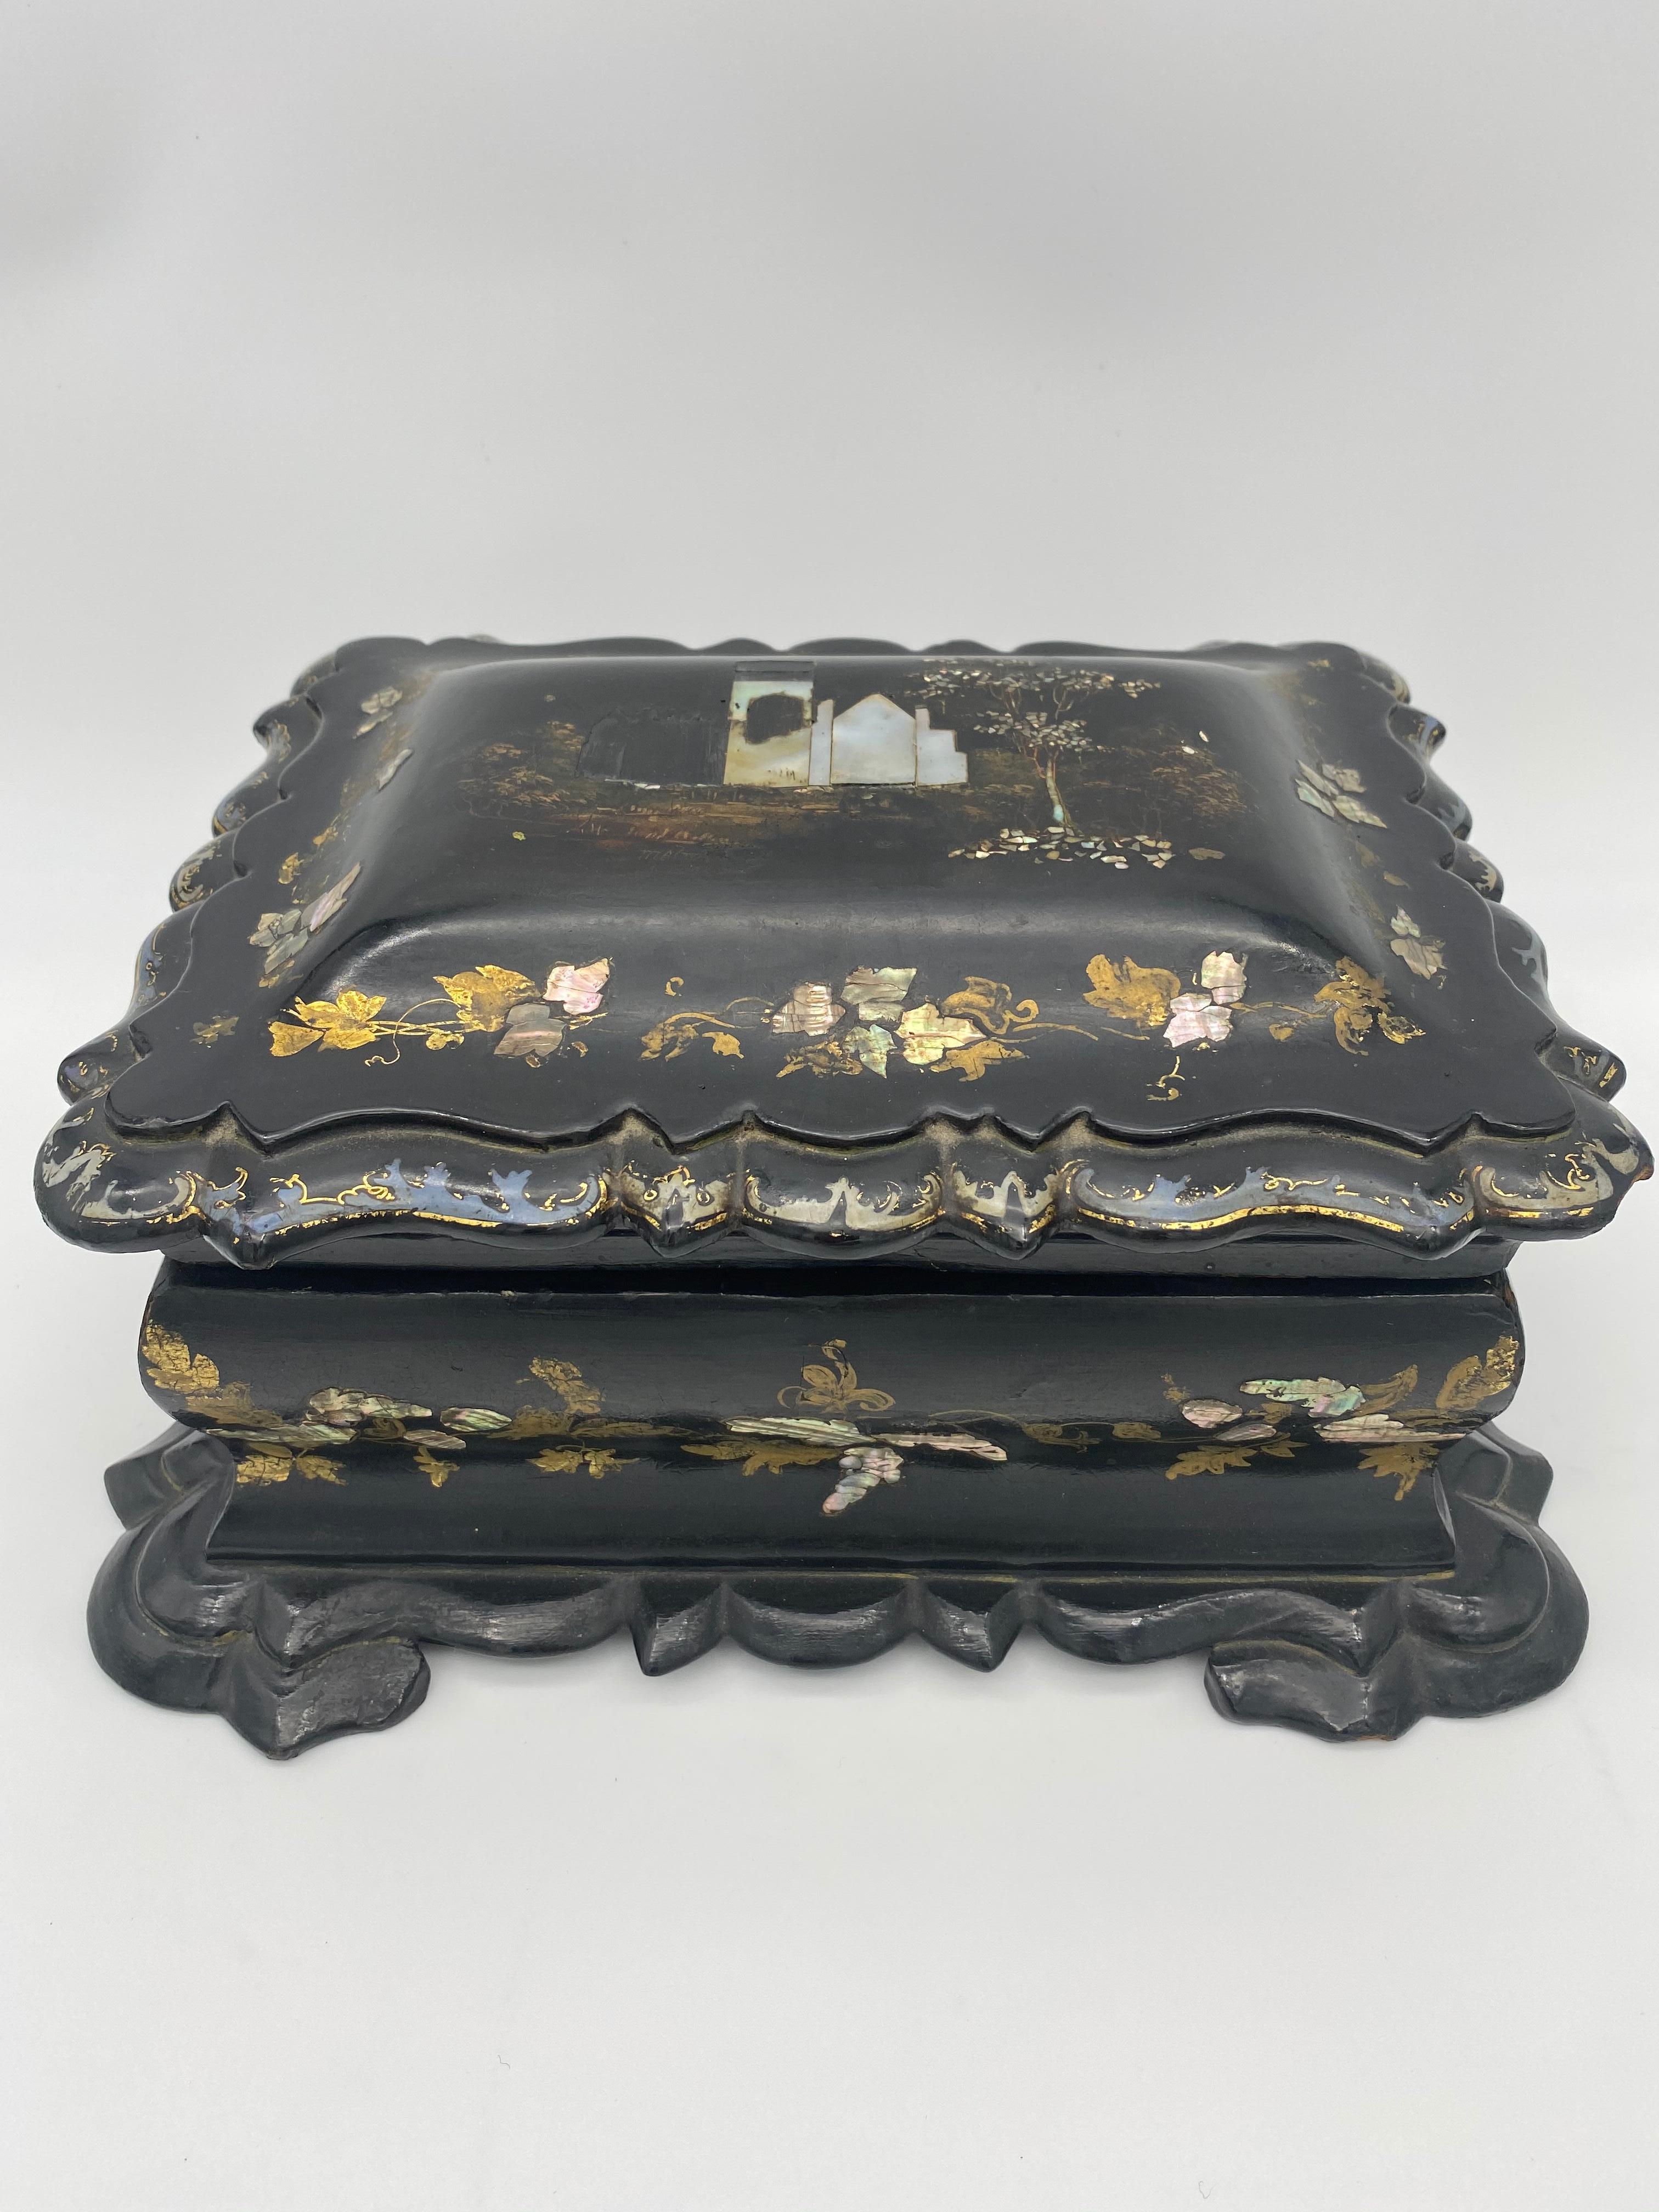 19th century Chinese black lacquer tea caddy from the Qing dynasty decorated all-over with beautiful floral designs.